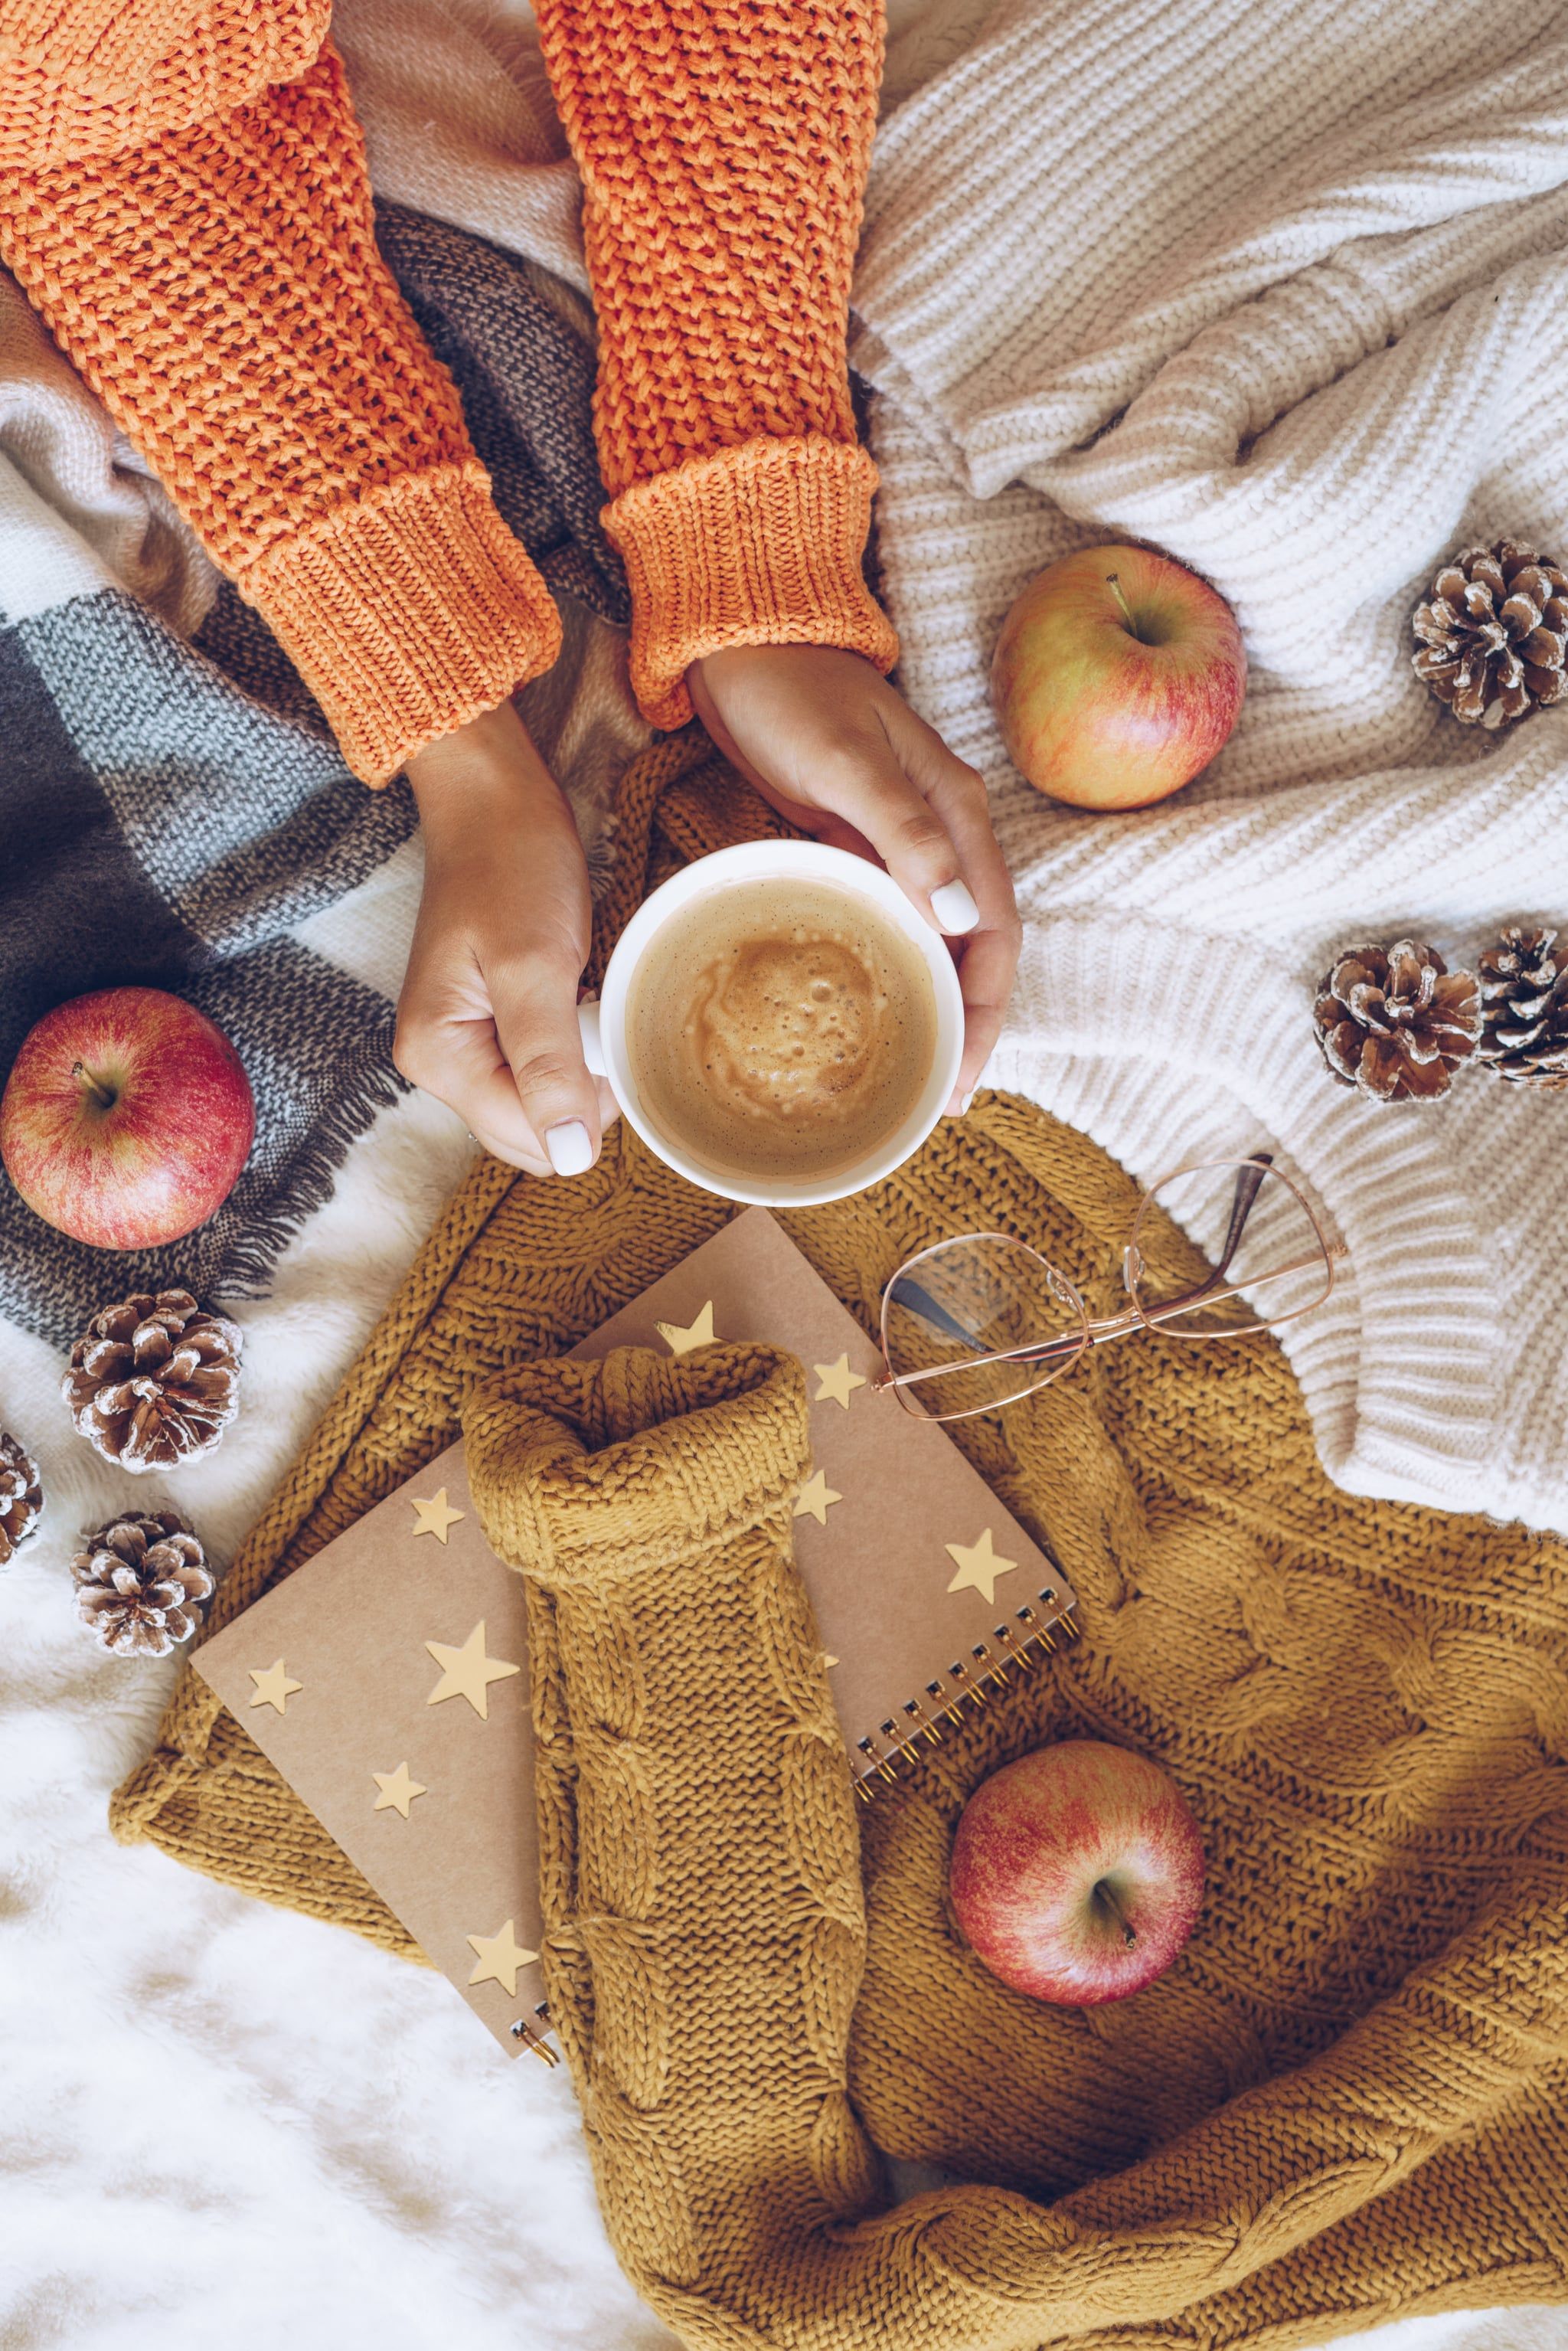 Fall Background: Cozy iPhone Wallpaper Fall iPhone Wallpaper That'll Instantly Make You Feel Cozy